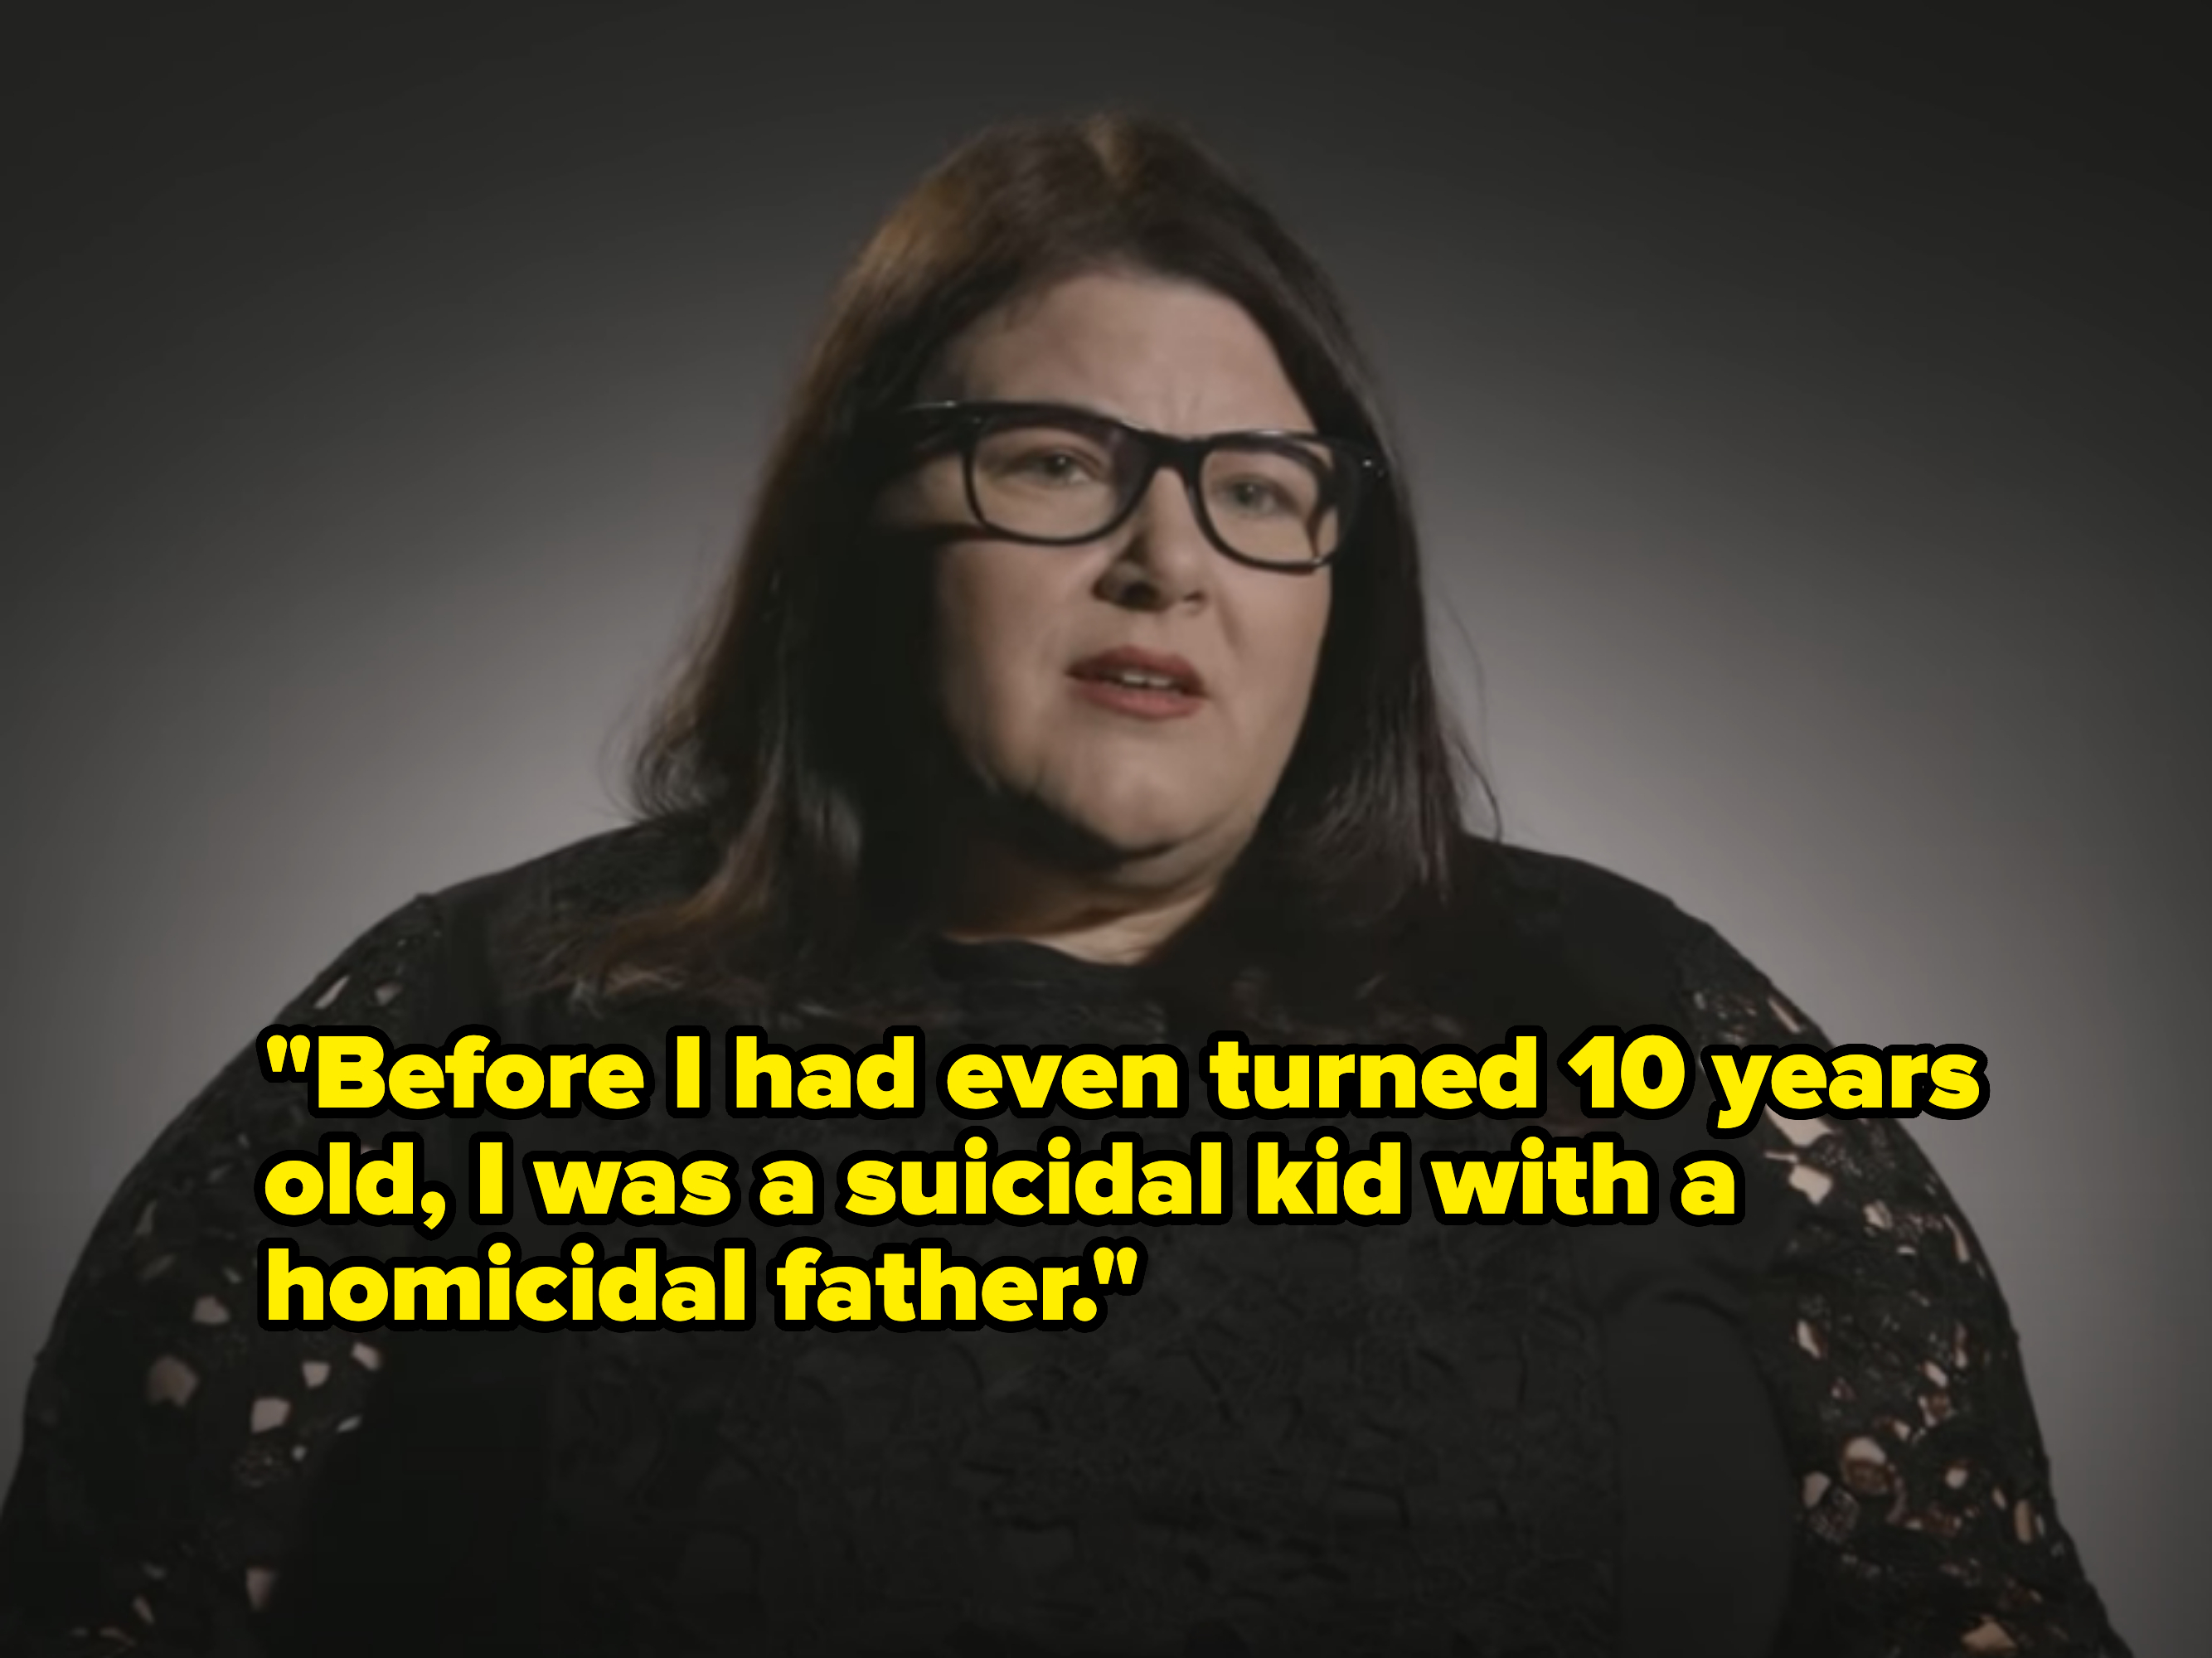 &quot;Before I had even turned 10 years old, I was a suicidal kid with a homicidal father&quot;